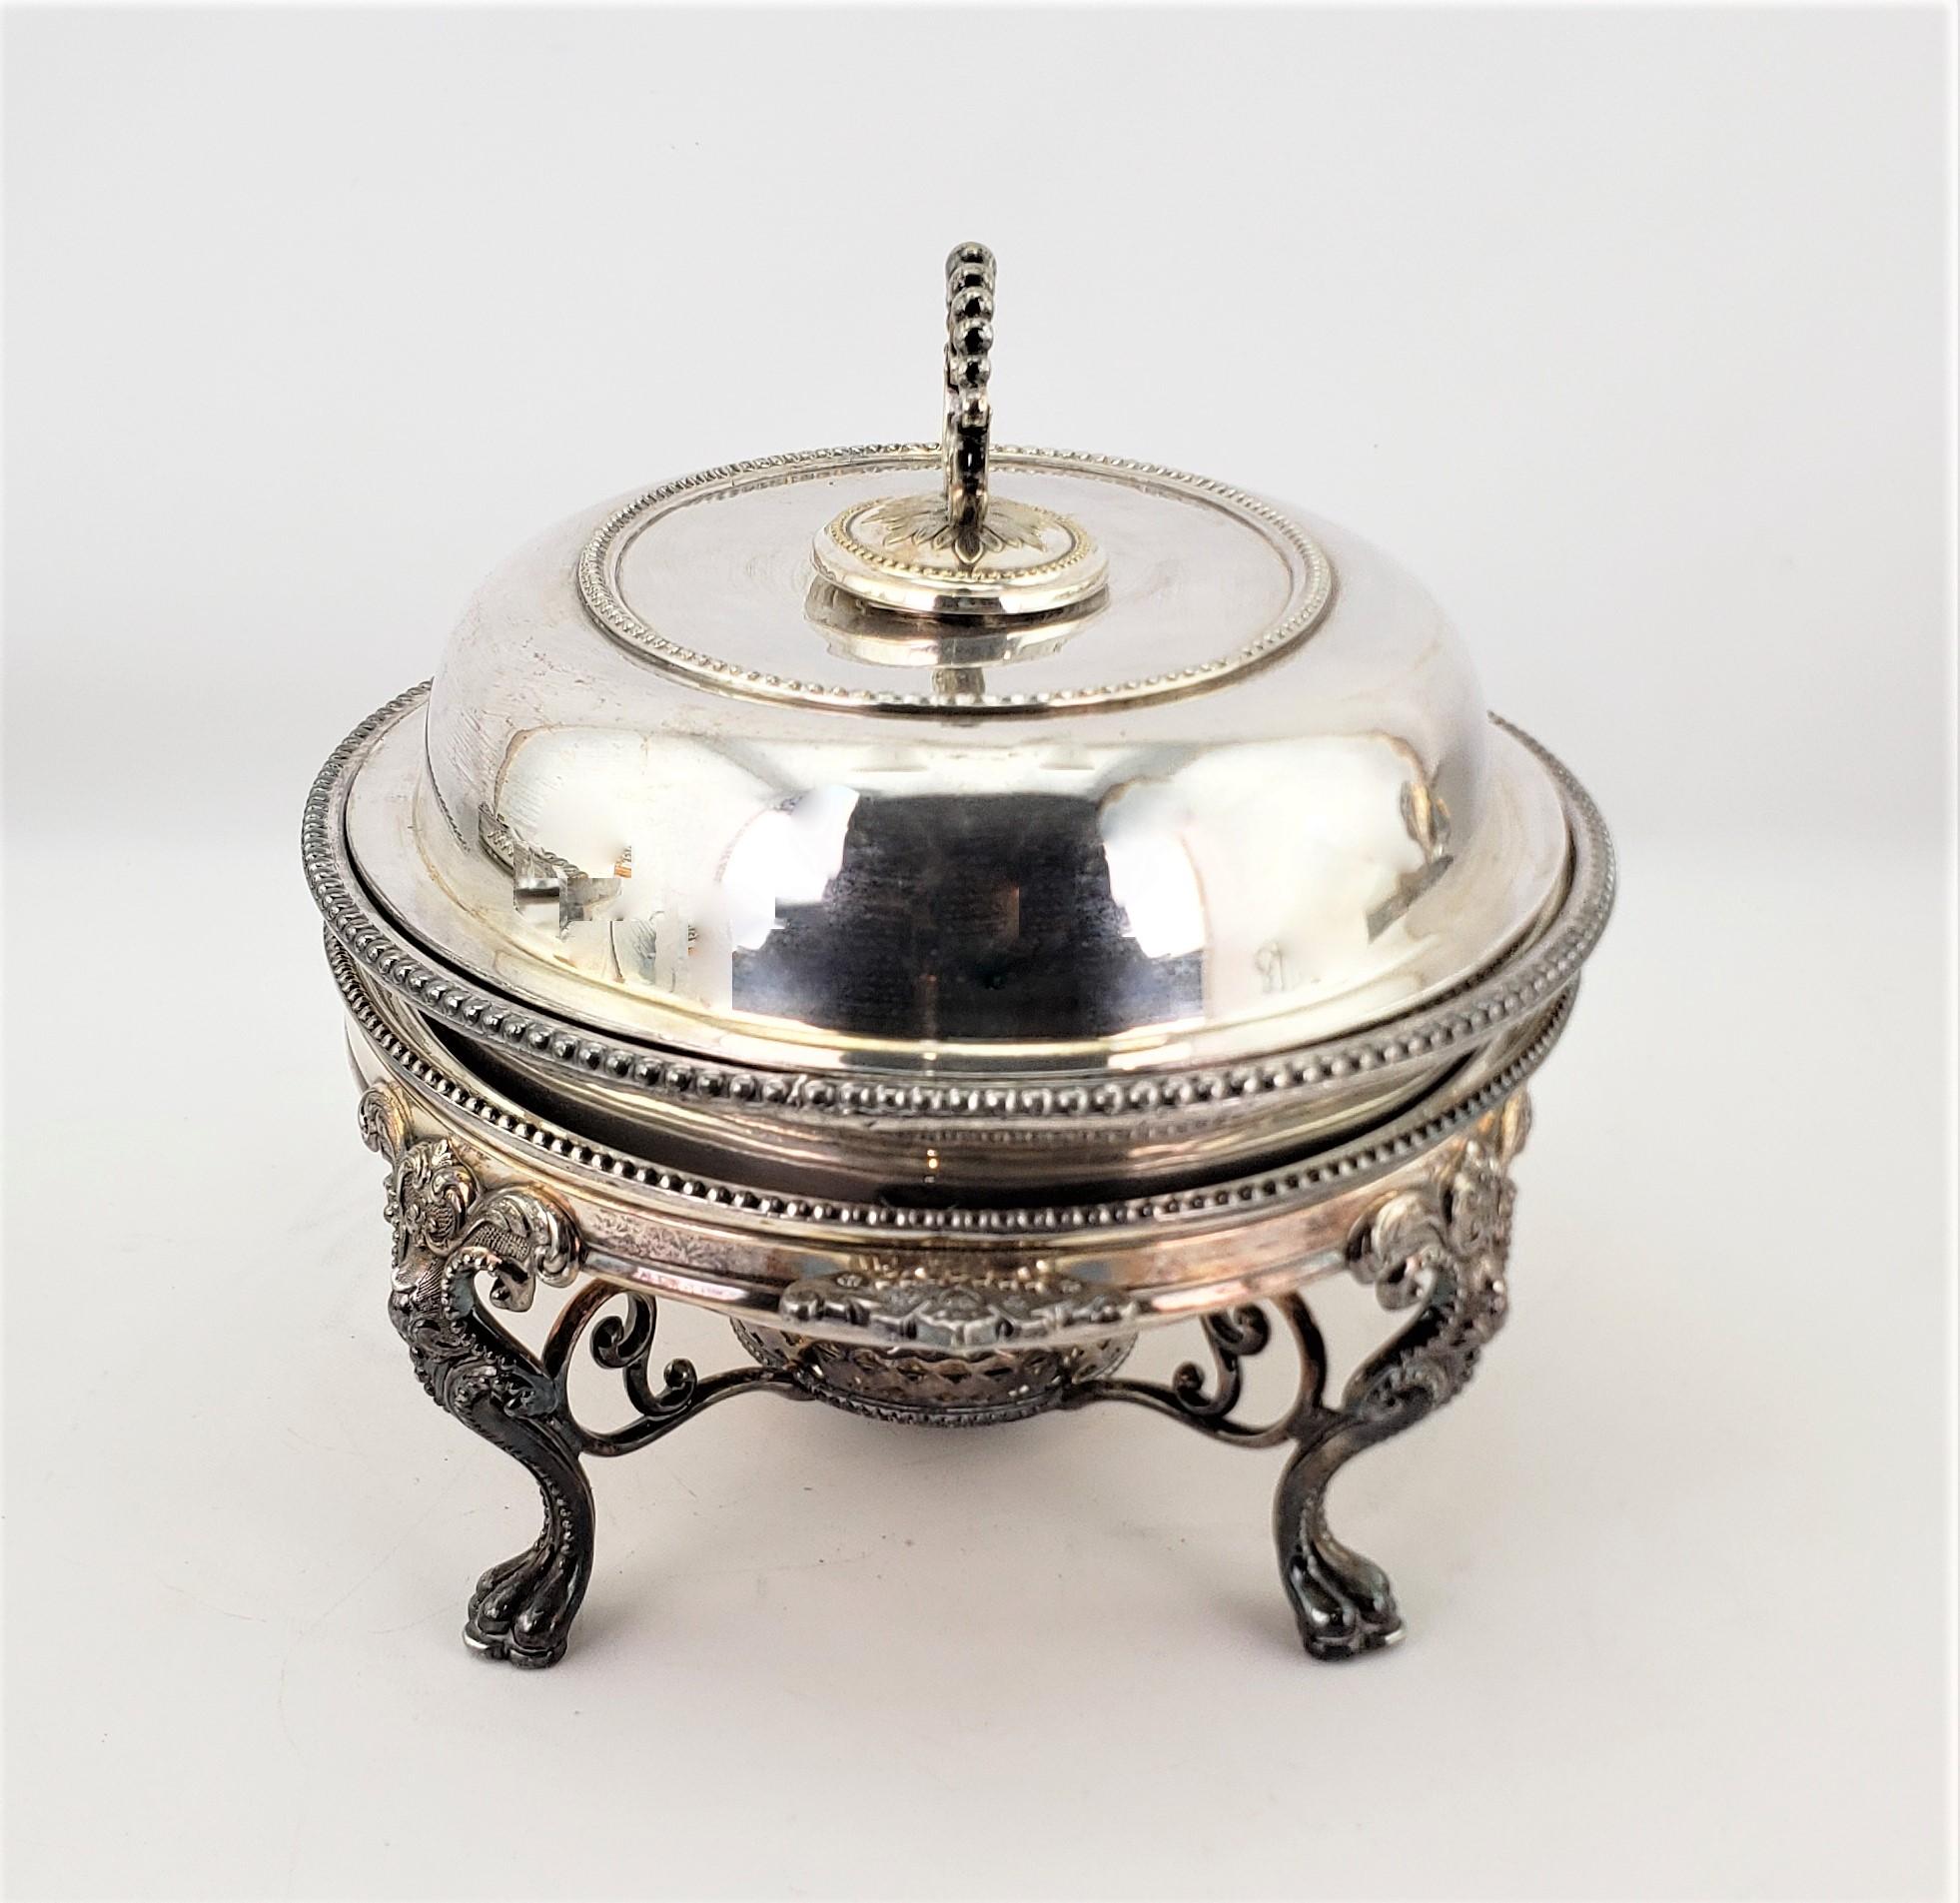 American Antique Reed & Barton Silver Plated Covered Warm Food Server or Chafing Dish